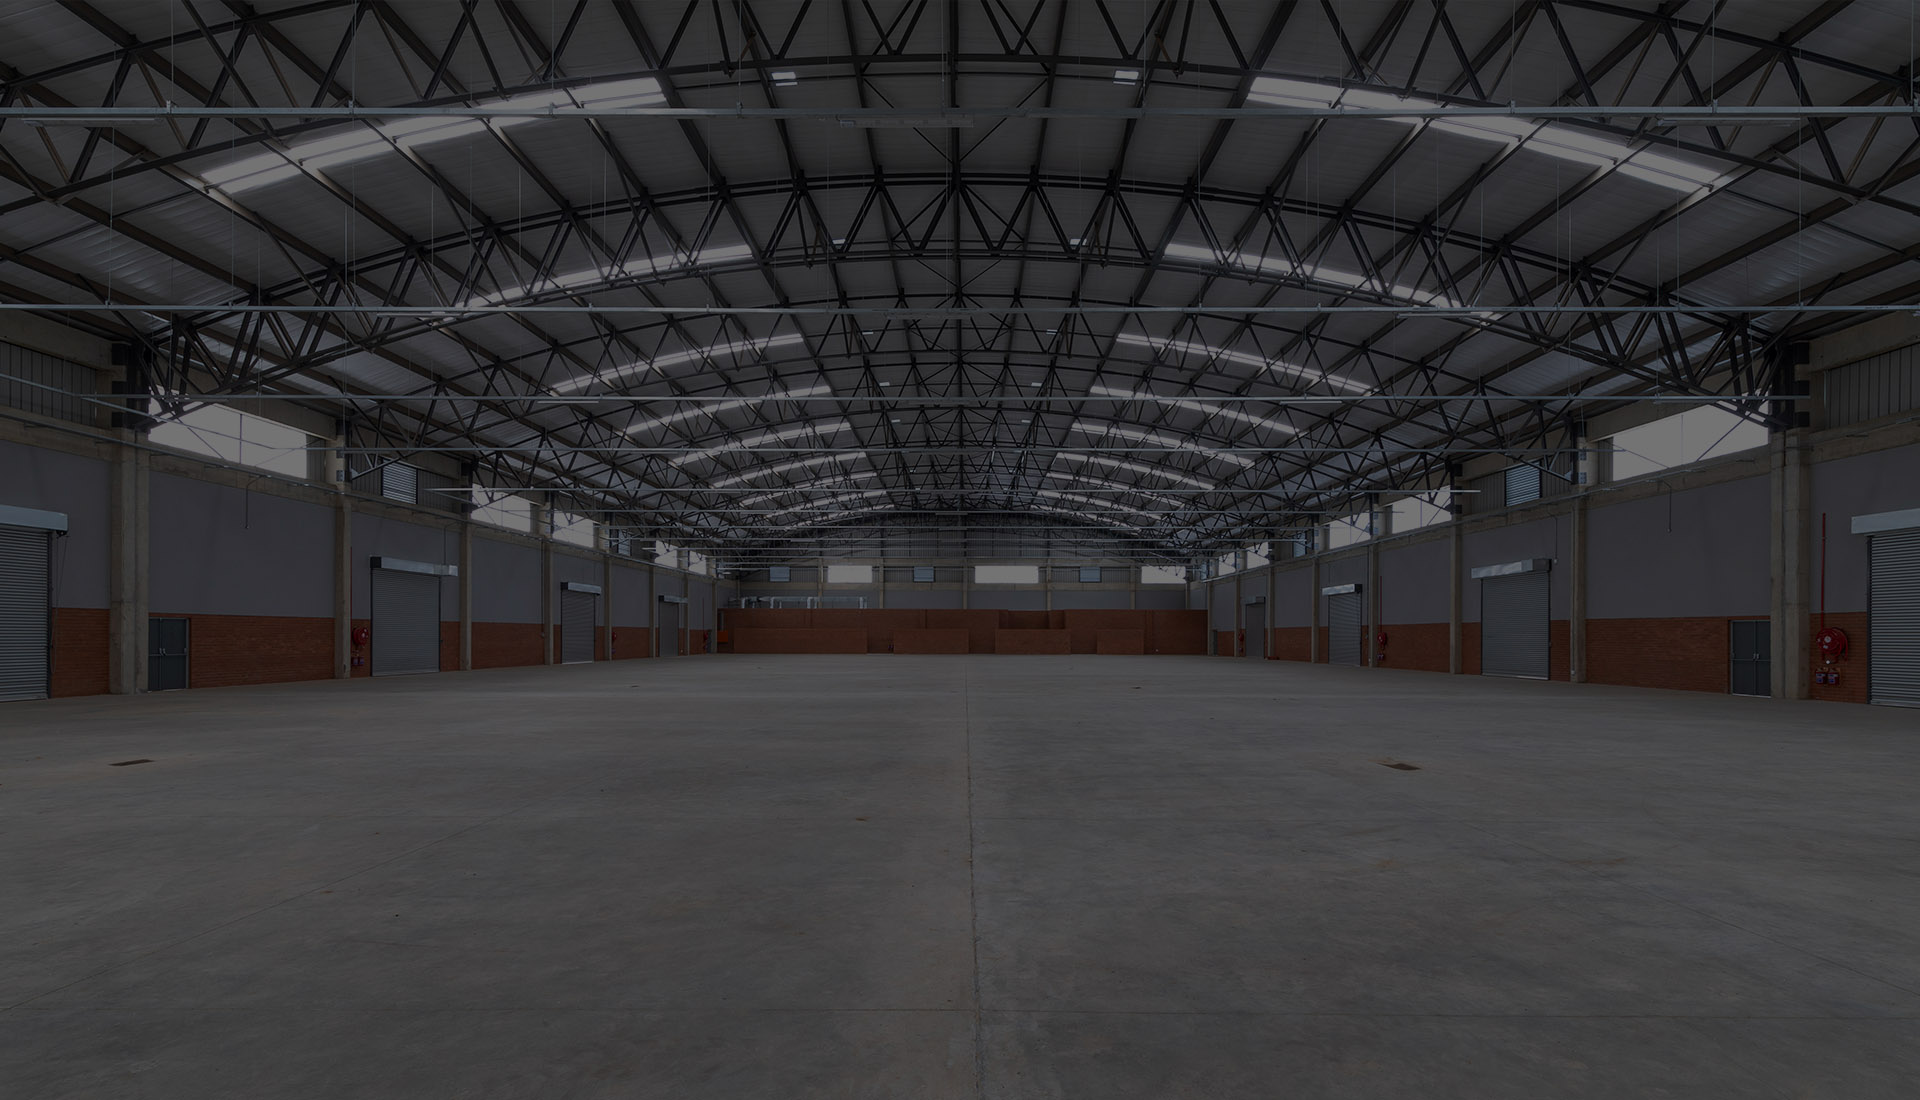 Construction Photography for TEMI Construction - Warehouse, South Africa